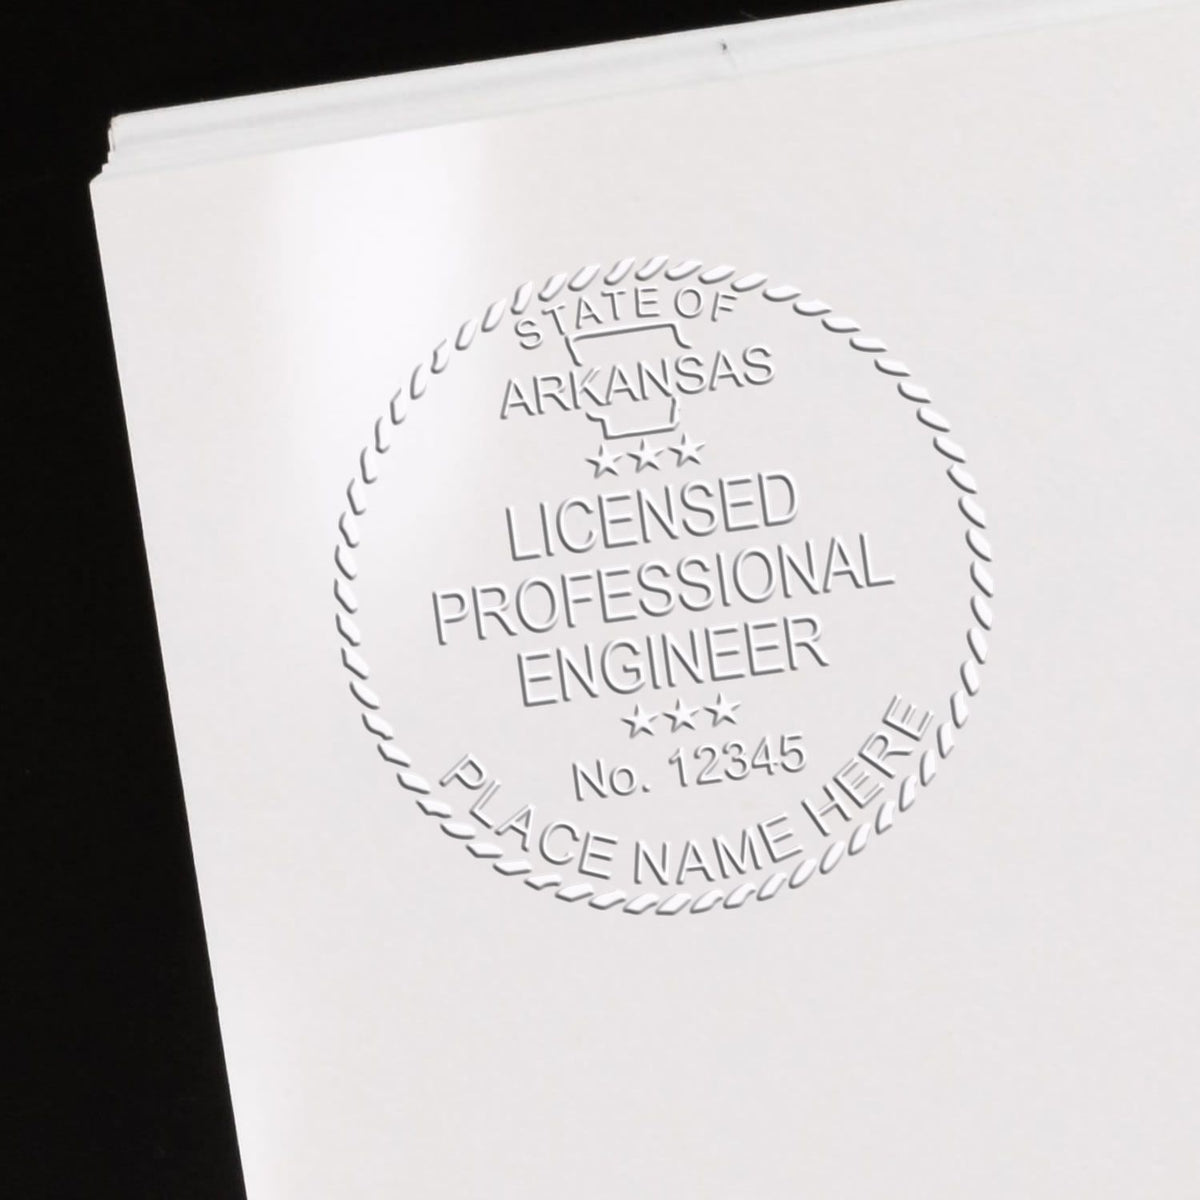 An in use photo of the Hybrid Arkansas Engineer Seal showing a sample imprint on a cardstock